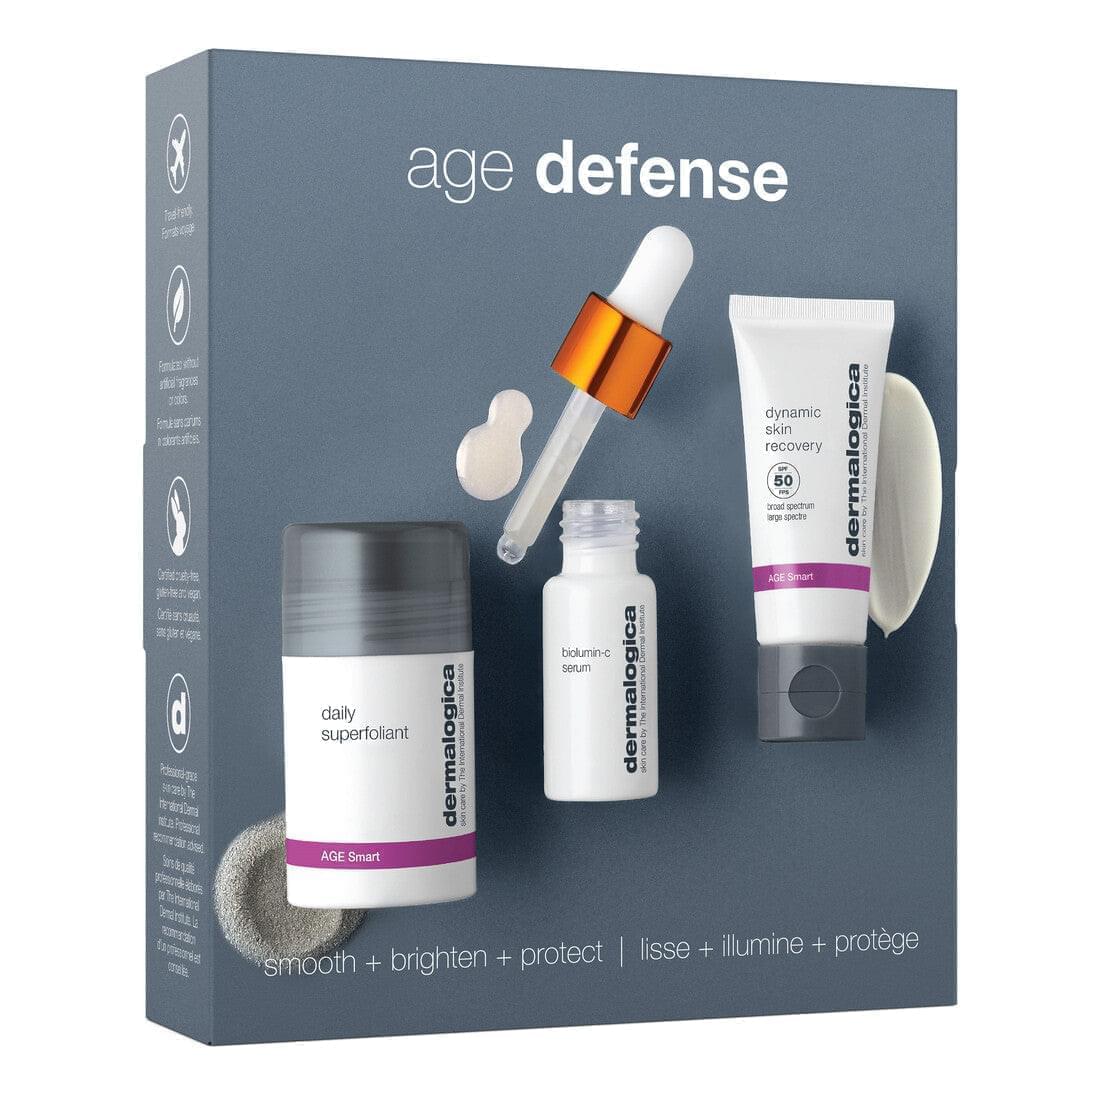 Discover beauty with Dermalogica Anti-Aging Products - Heaven Therapy Skincare